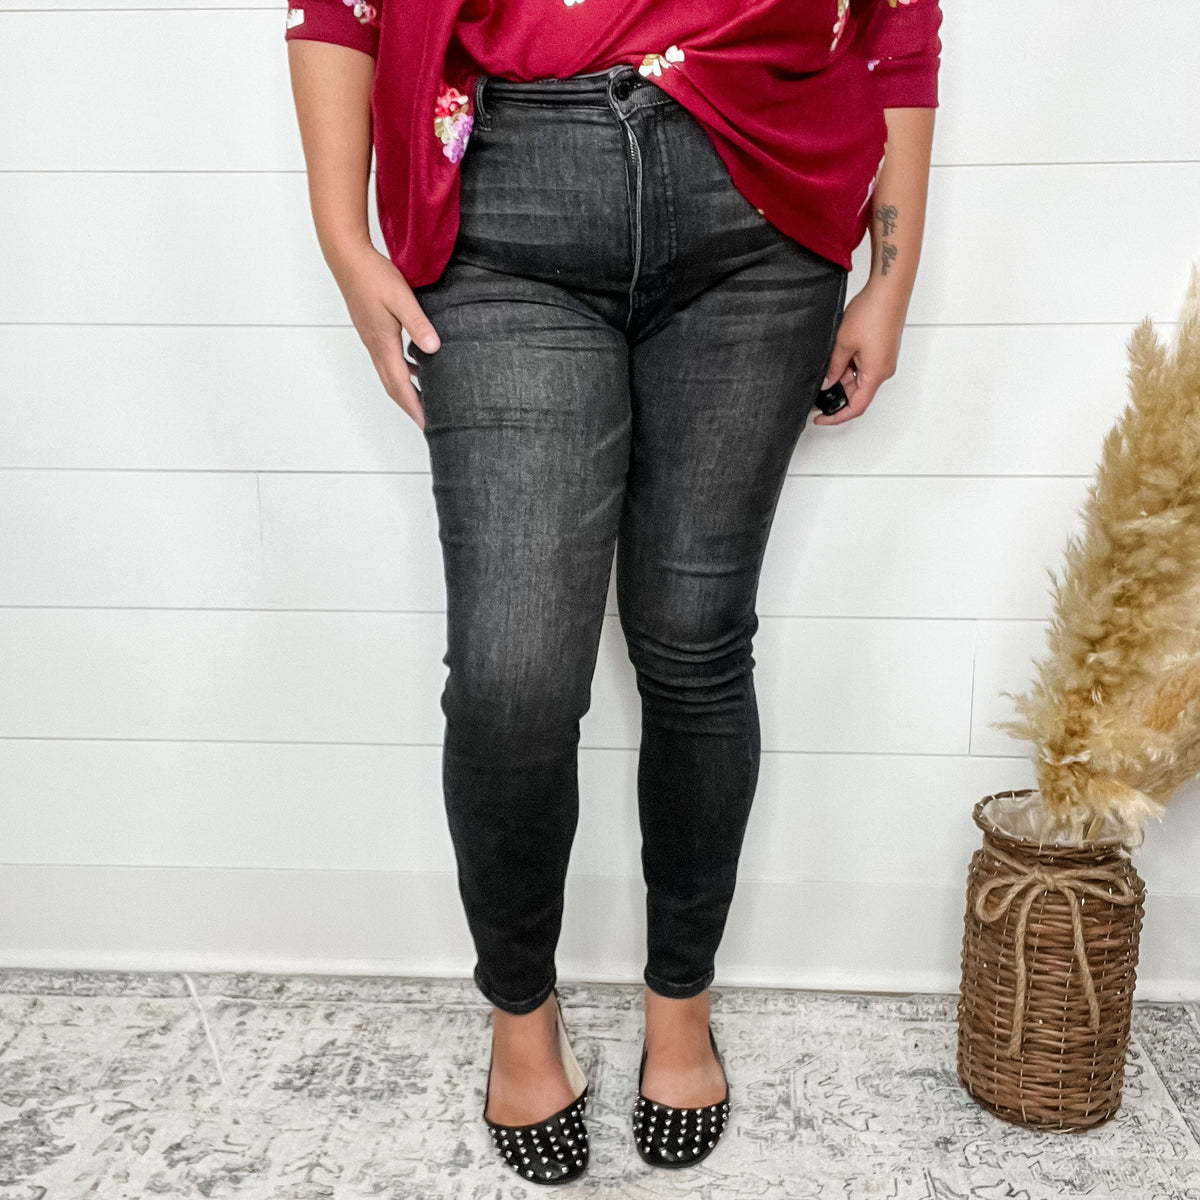 Judy Blue "Once In A Lifetime" Mineral Wash Black Tummy Control Jeans-Lola Monroe Boutique